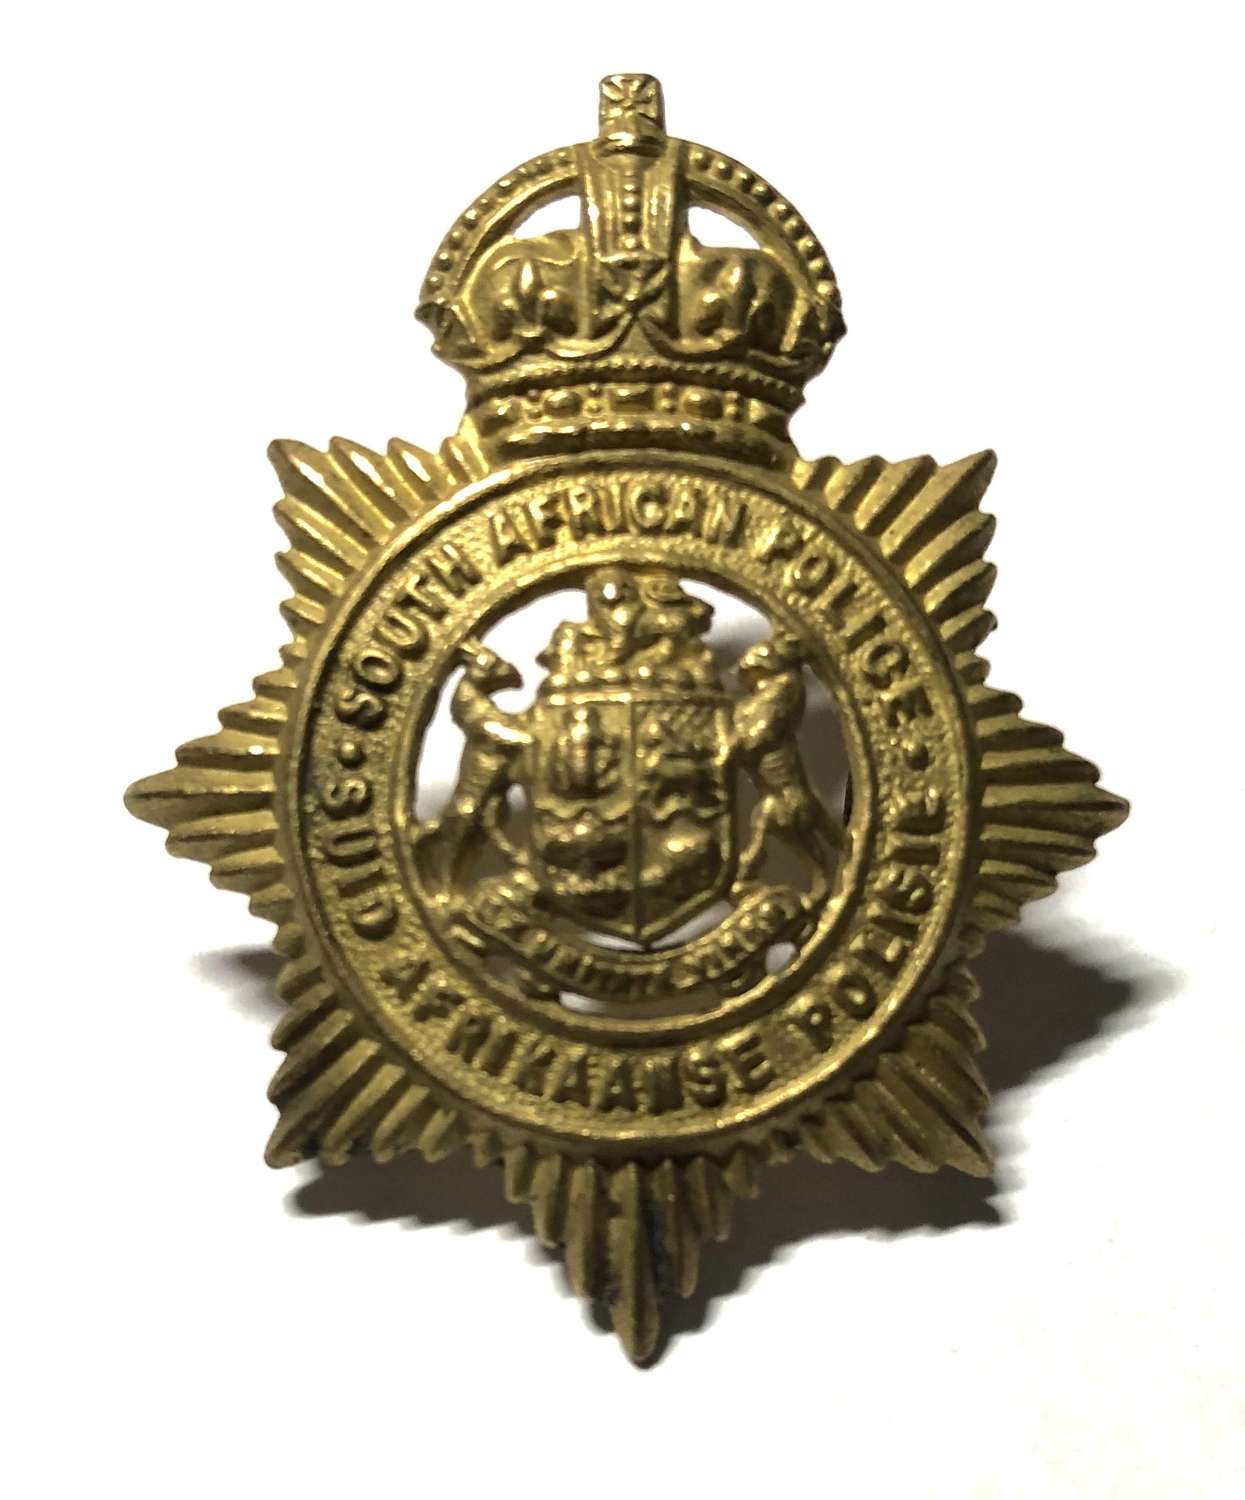 South African Police post 1937 Officer's gilt cap badge